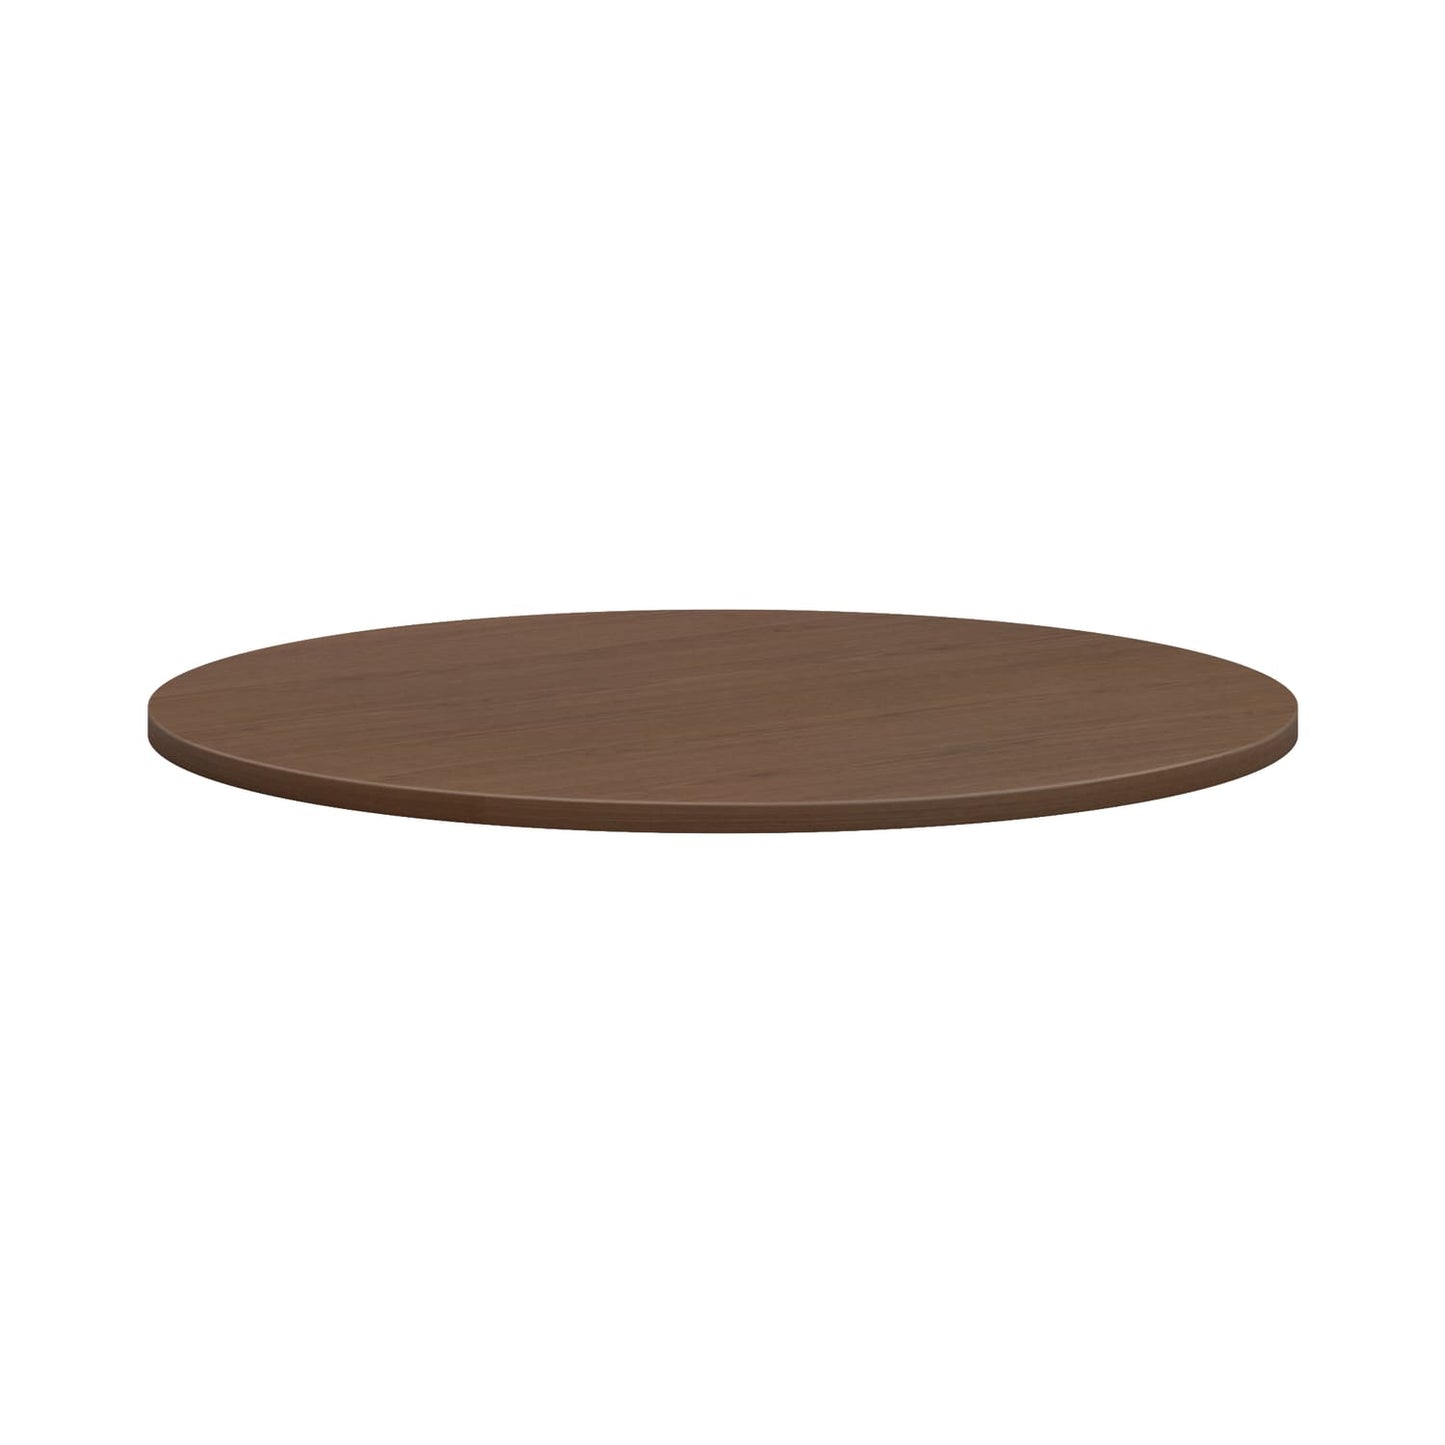 HON Mod Conference Table Top | Round | 42" | Sepia Walnut Finish